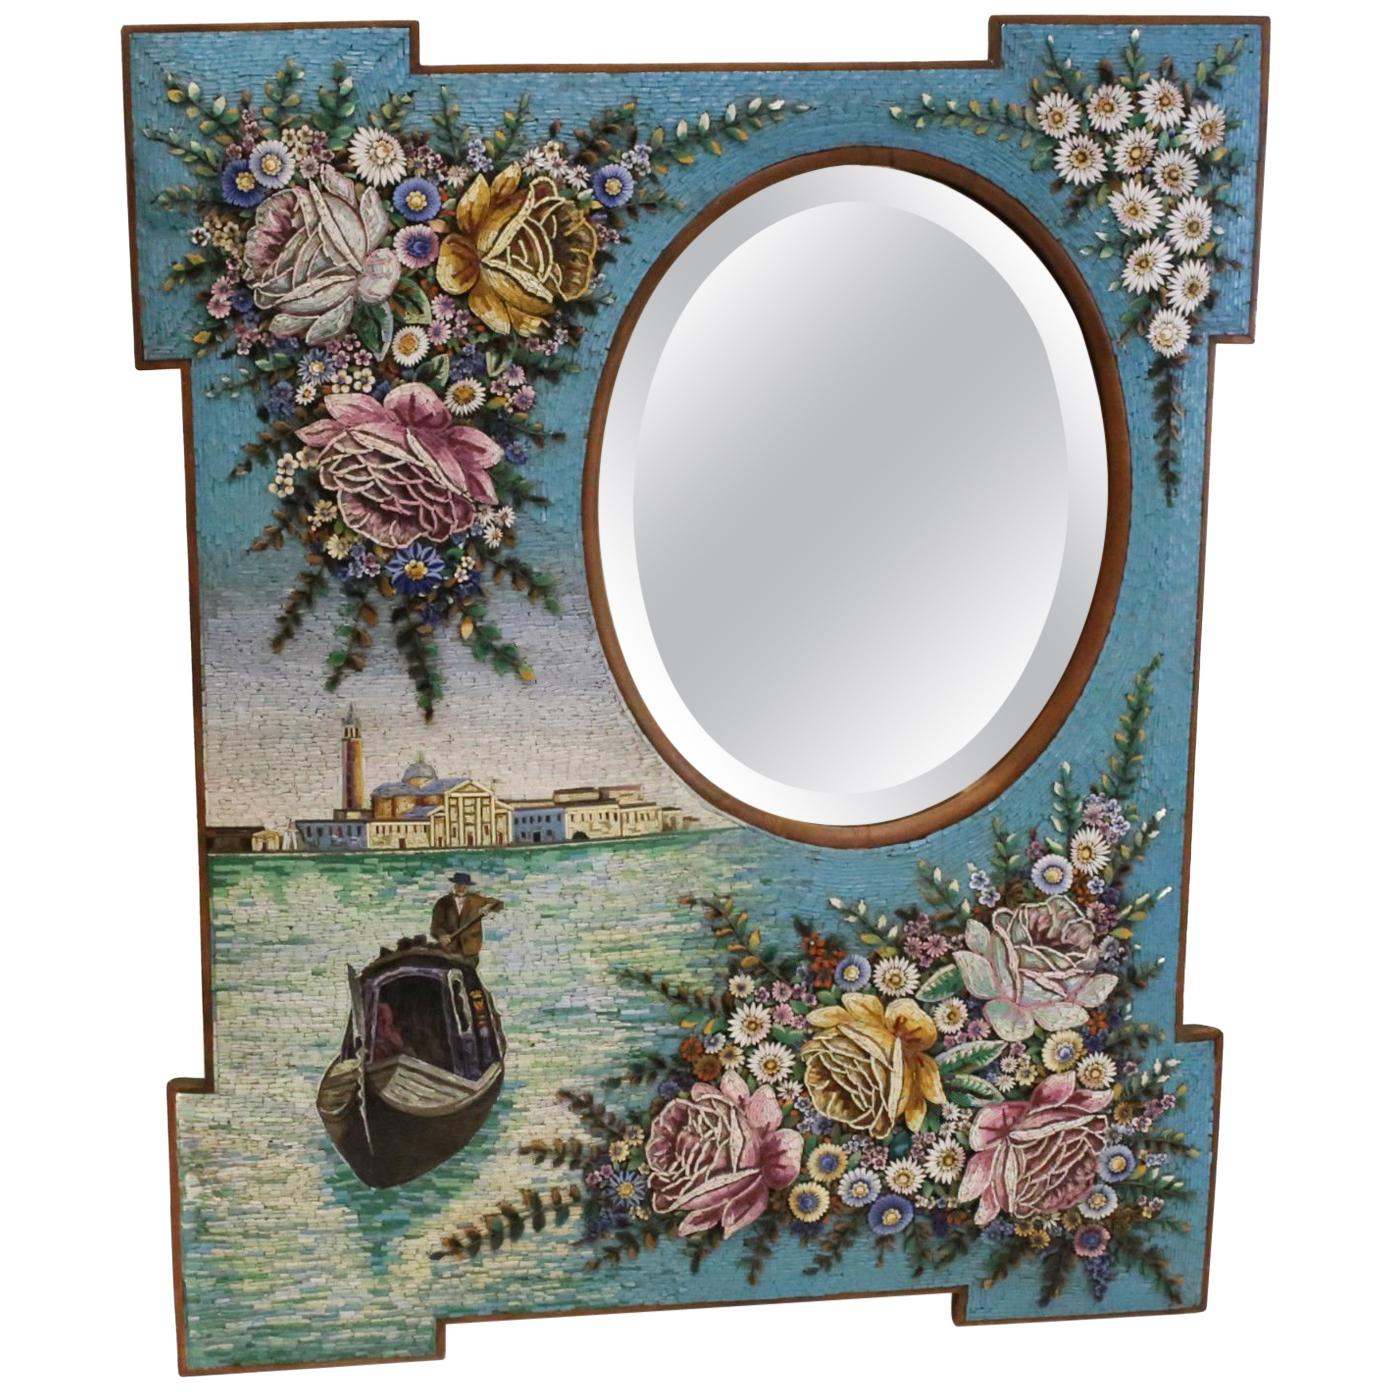 Large Antique Venetian Micromosaic Hanging Wall Mirror, Grand Canal Seascape For Sale